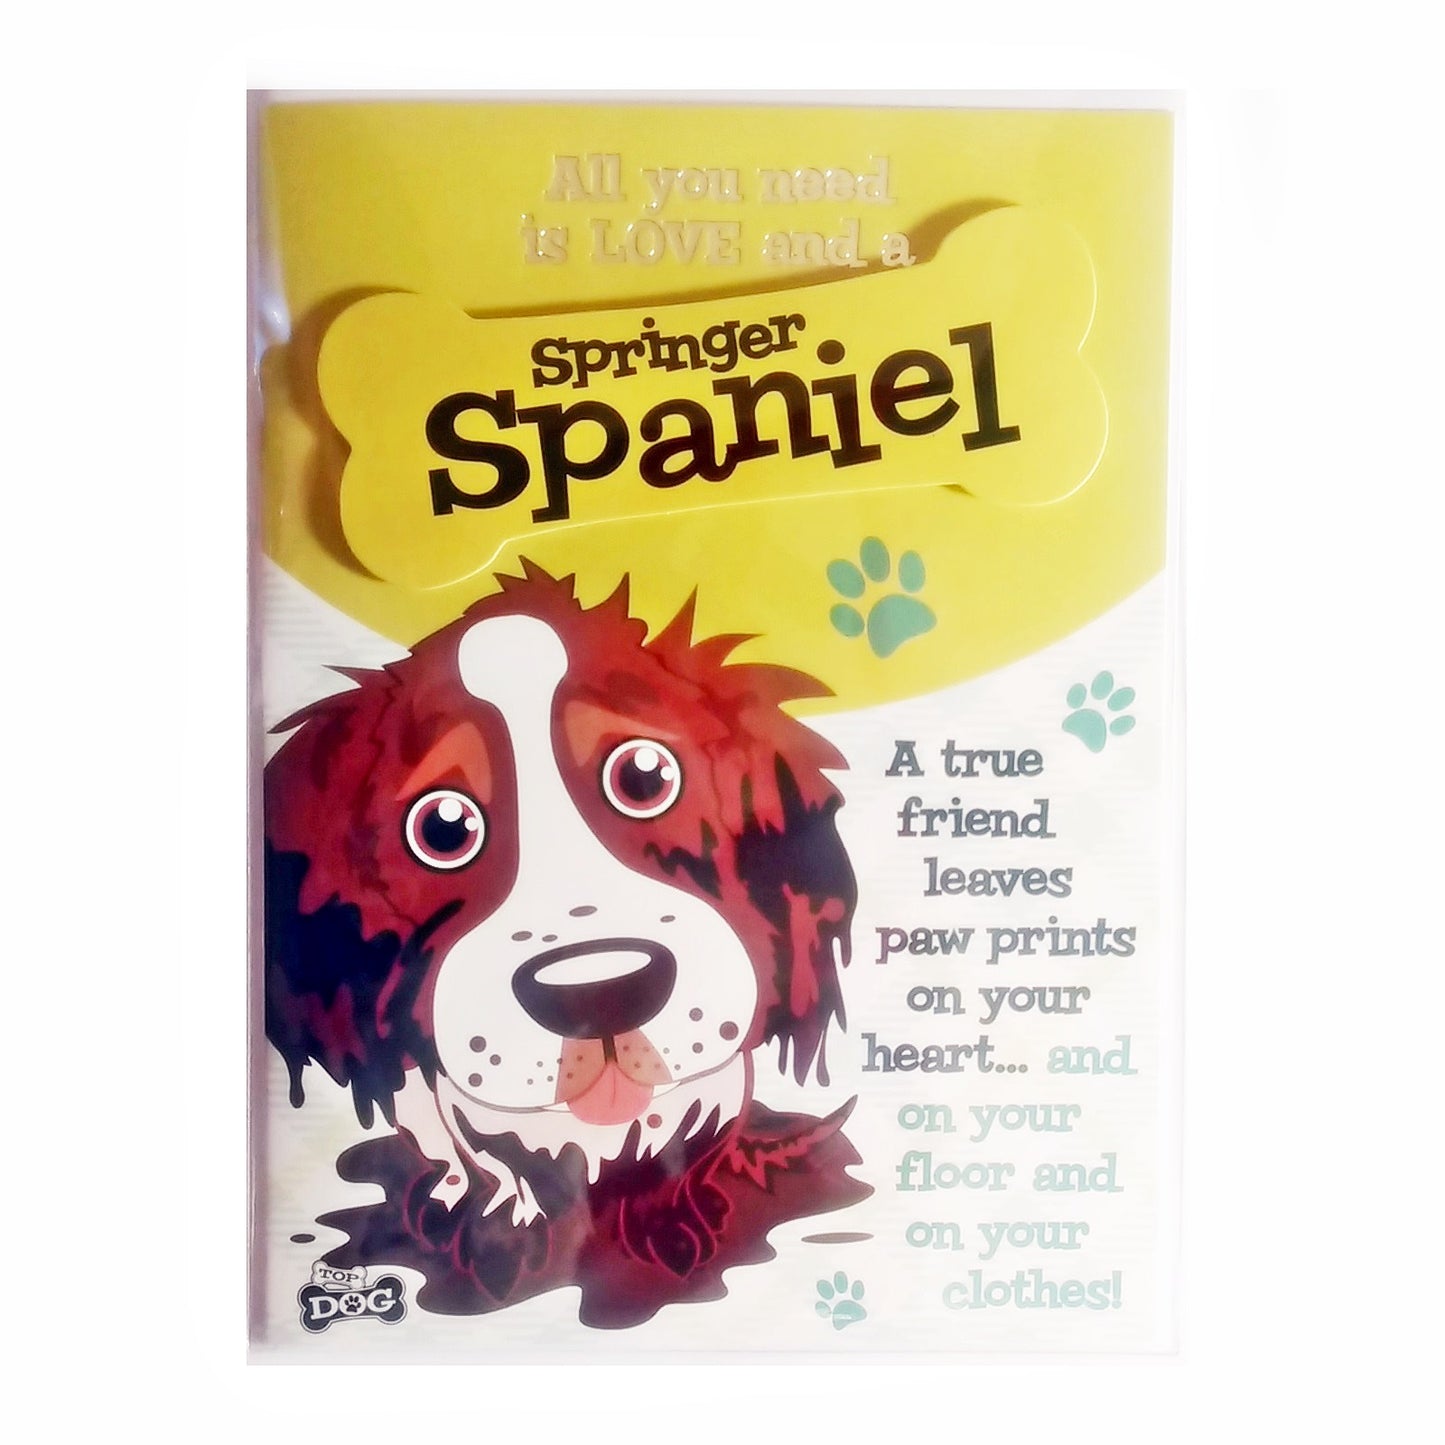 Wags & Whiskers Dog Greeting Card "Springer Spaniel Brown/White" by Paper Island